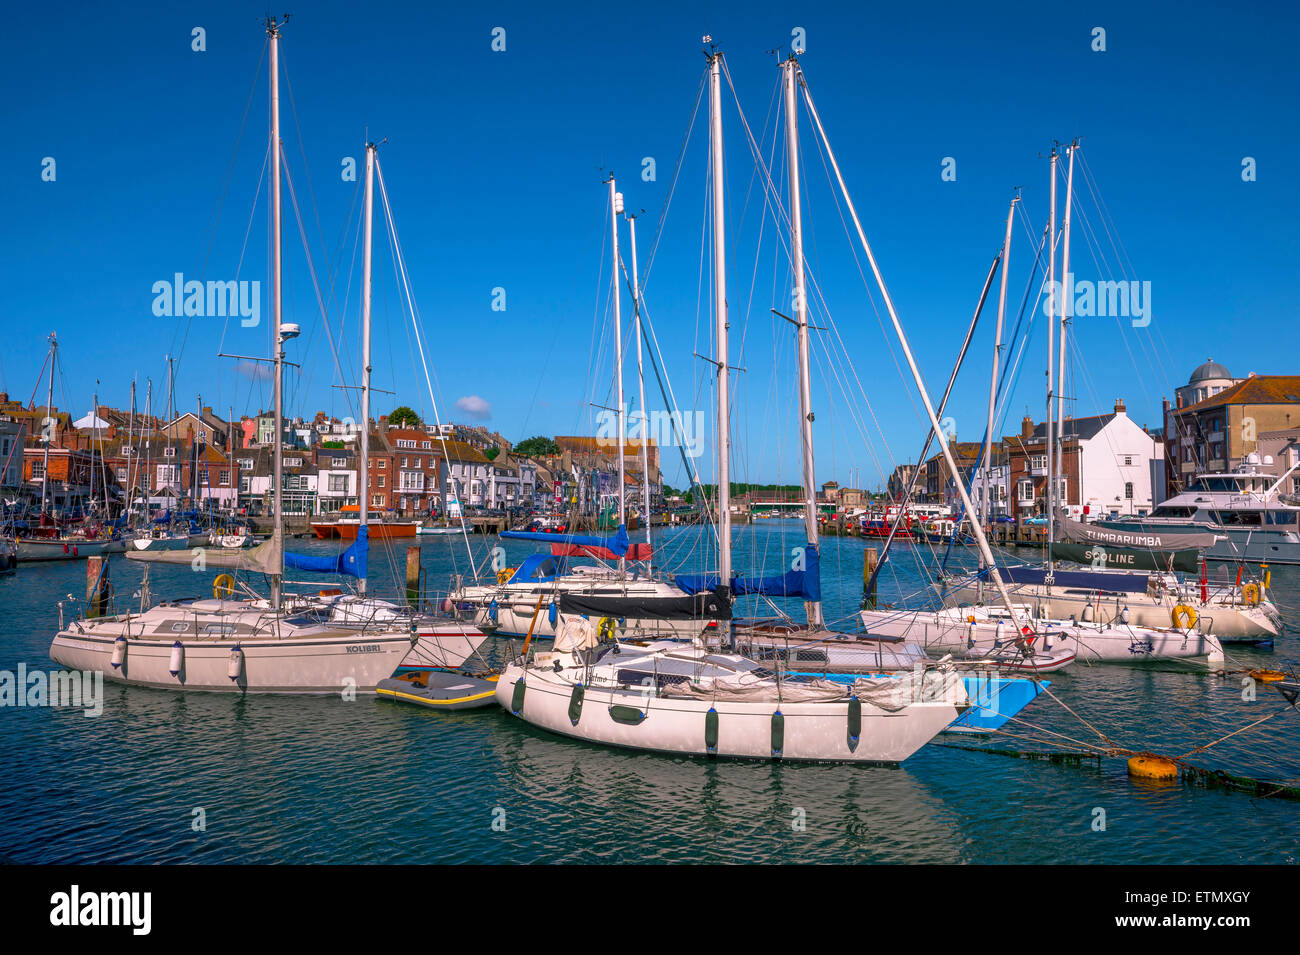 Boats and yachts in Weymouth harbour. Stock Photo